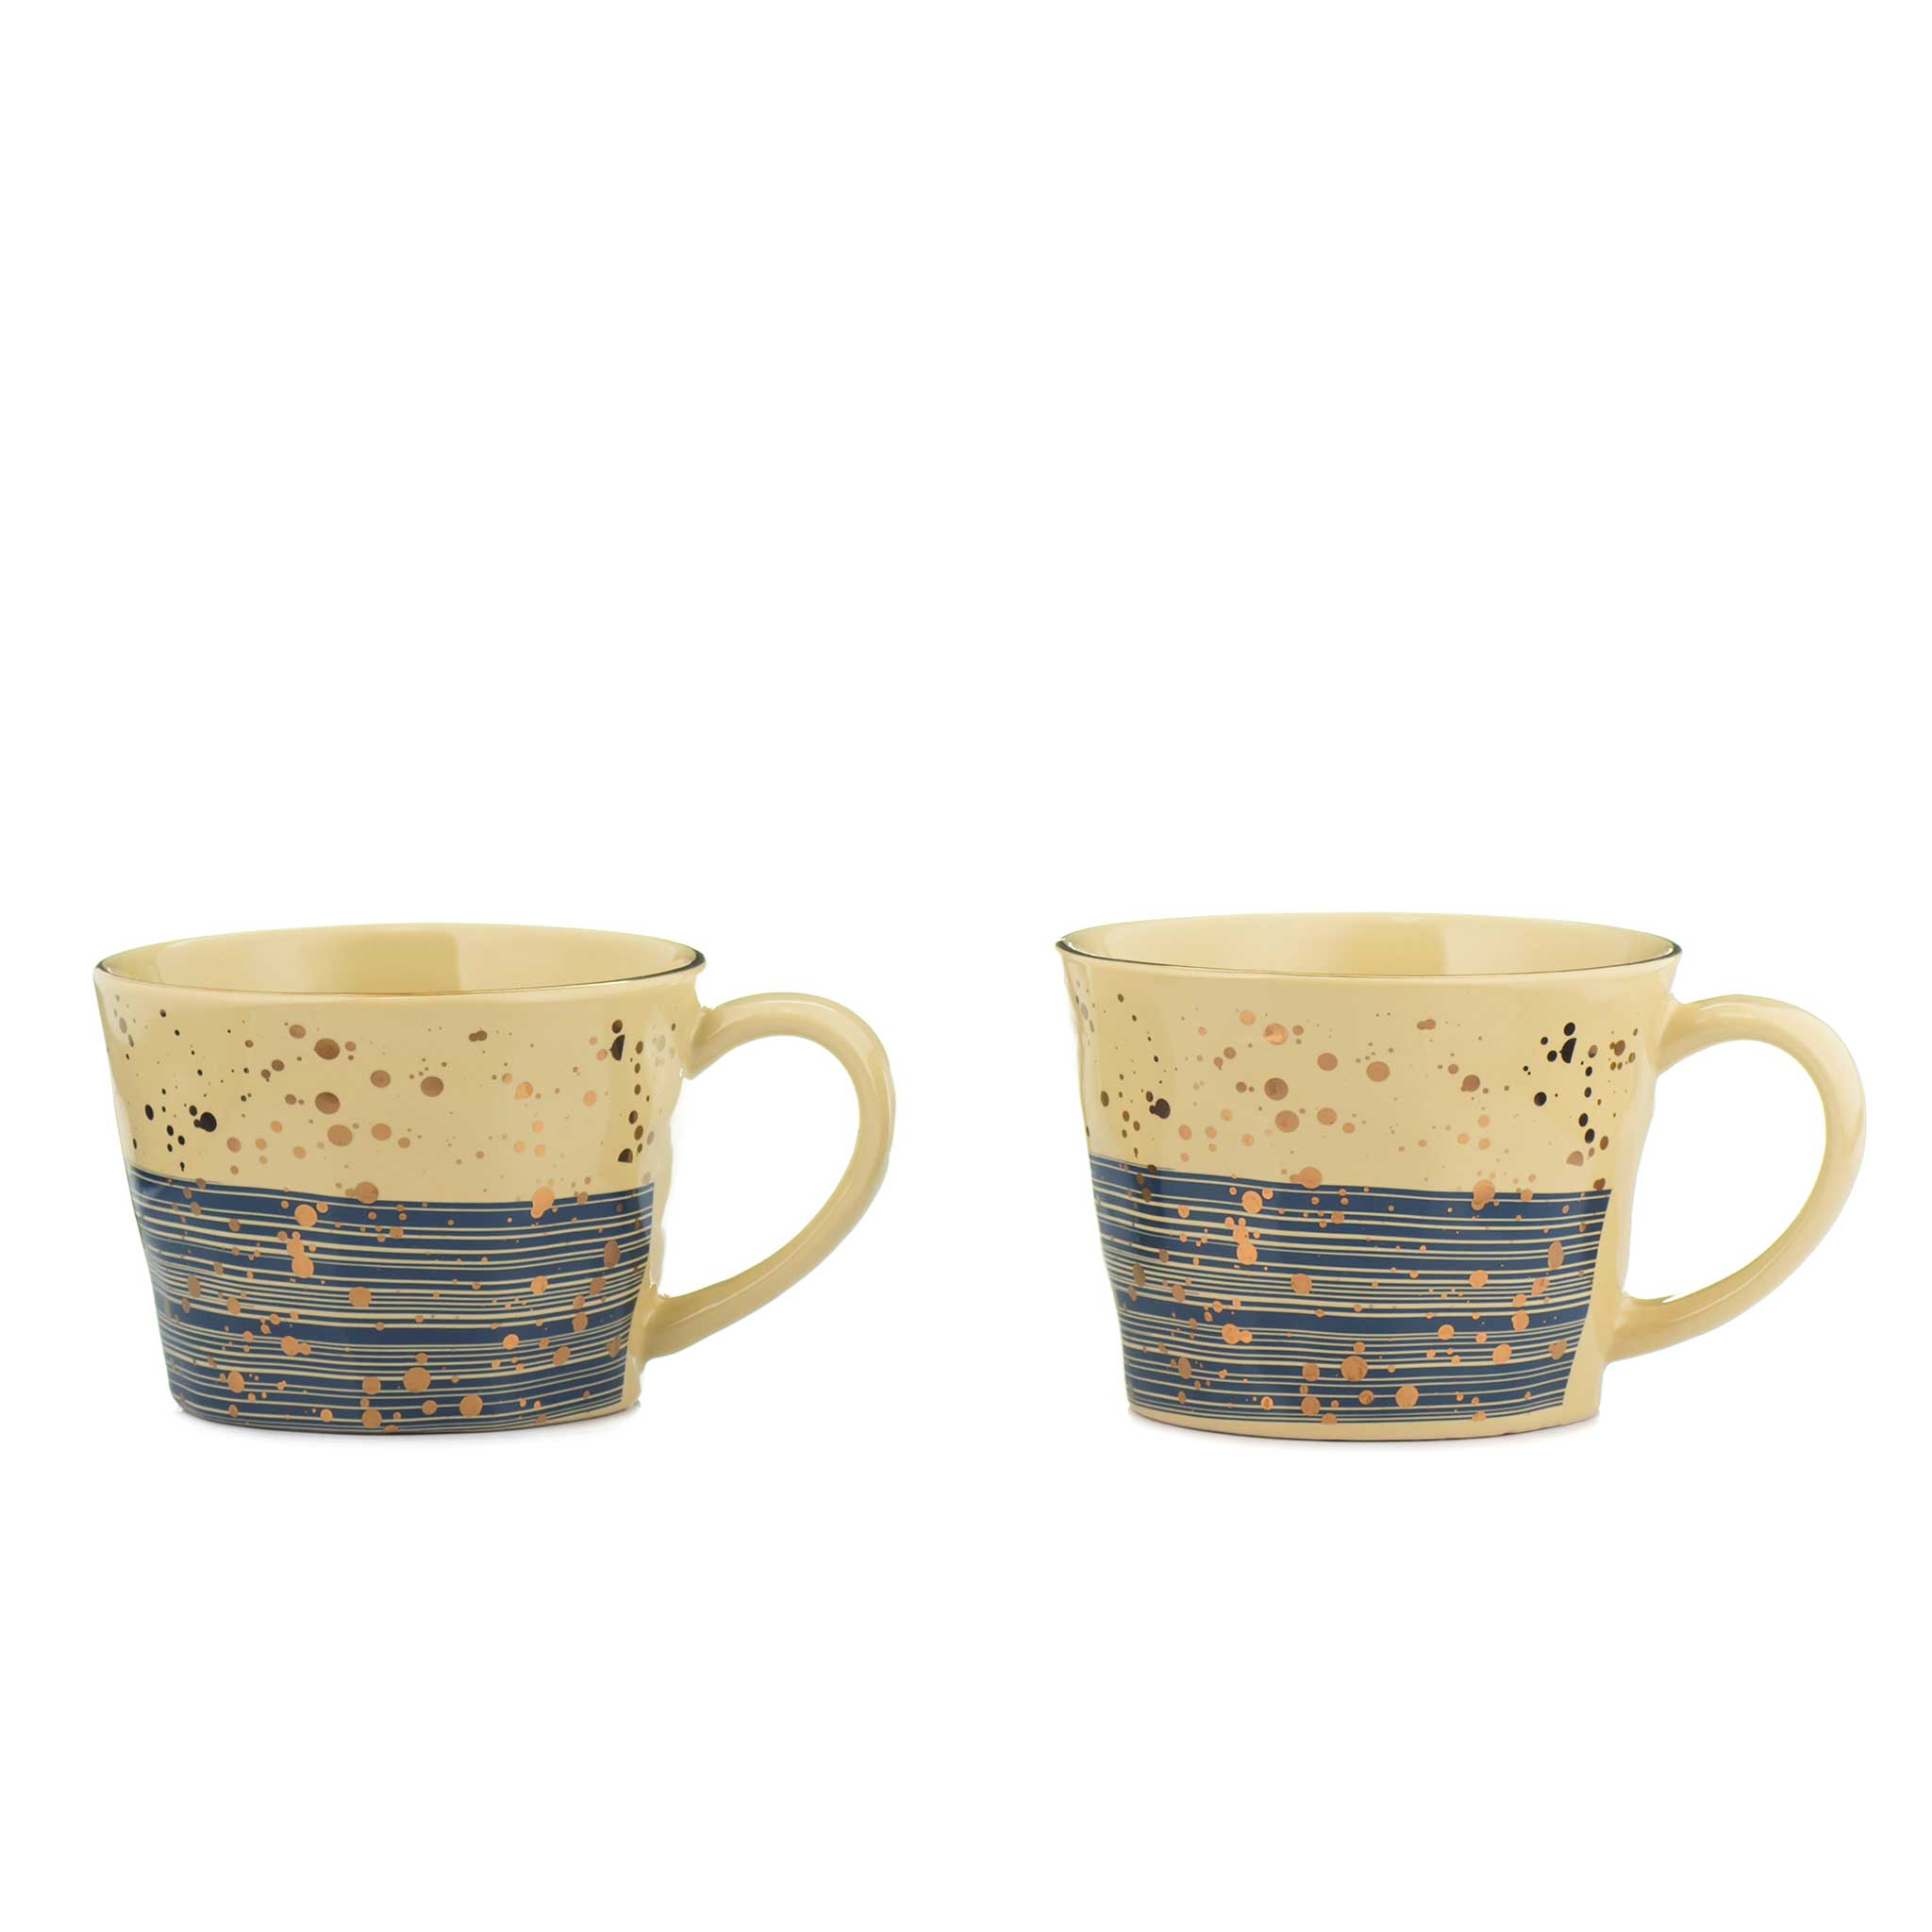 Navy and yellow mugs with golden splatters from China Blue